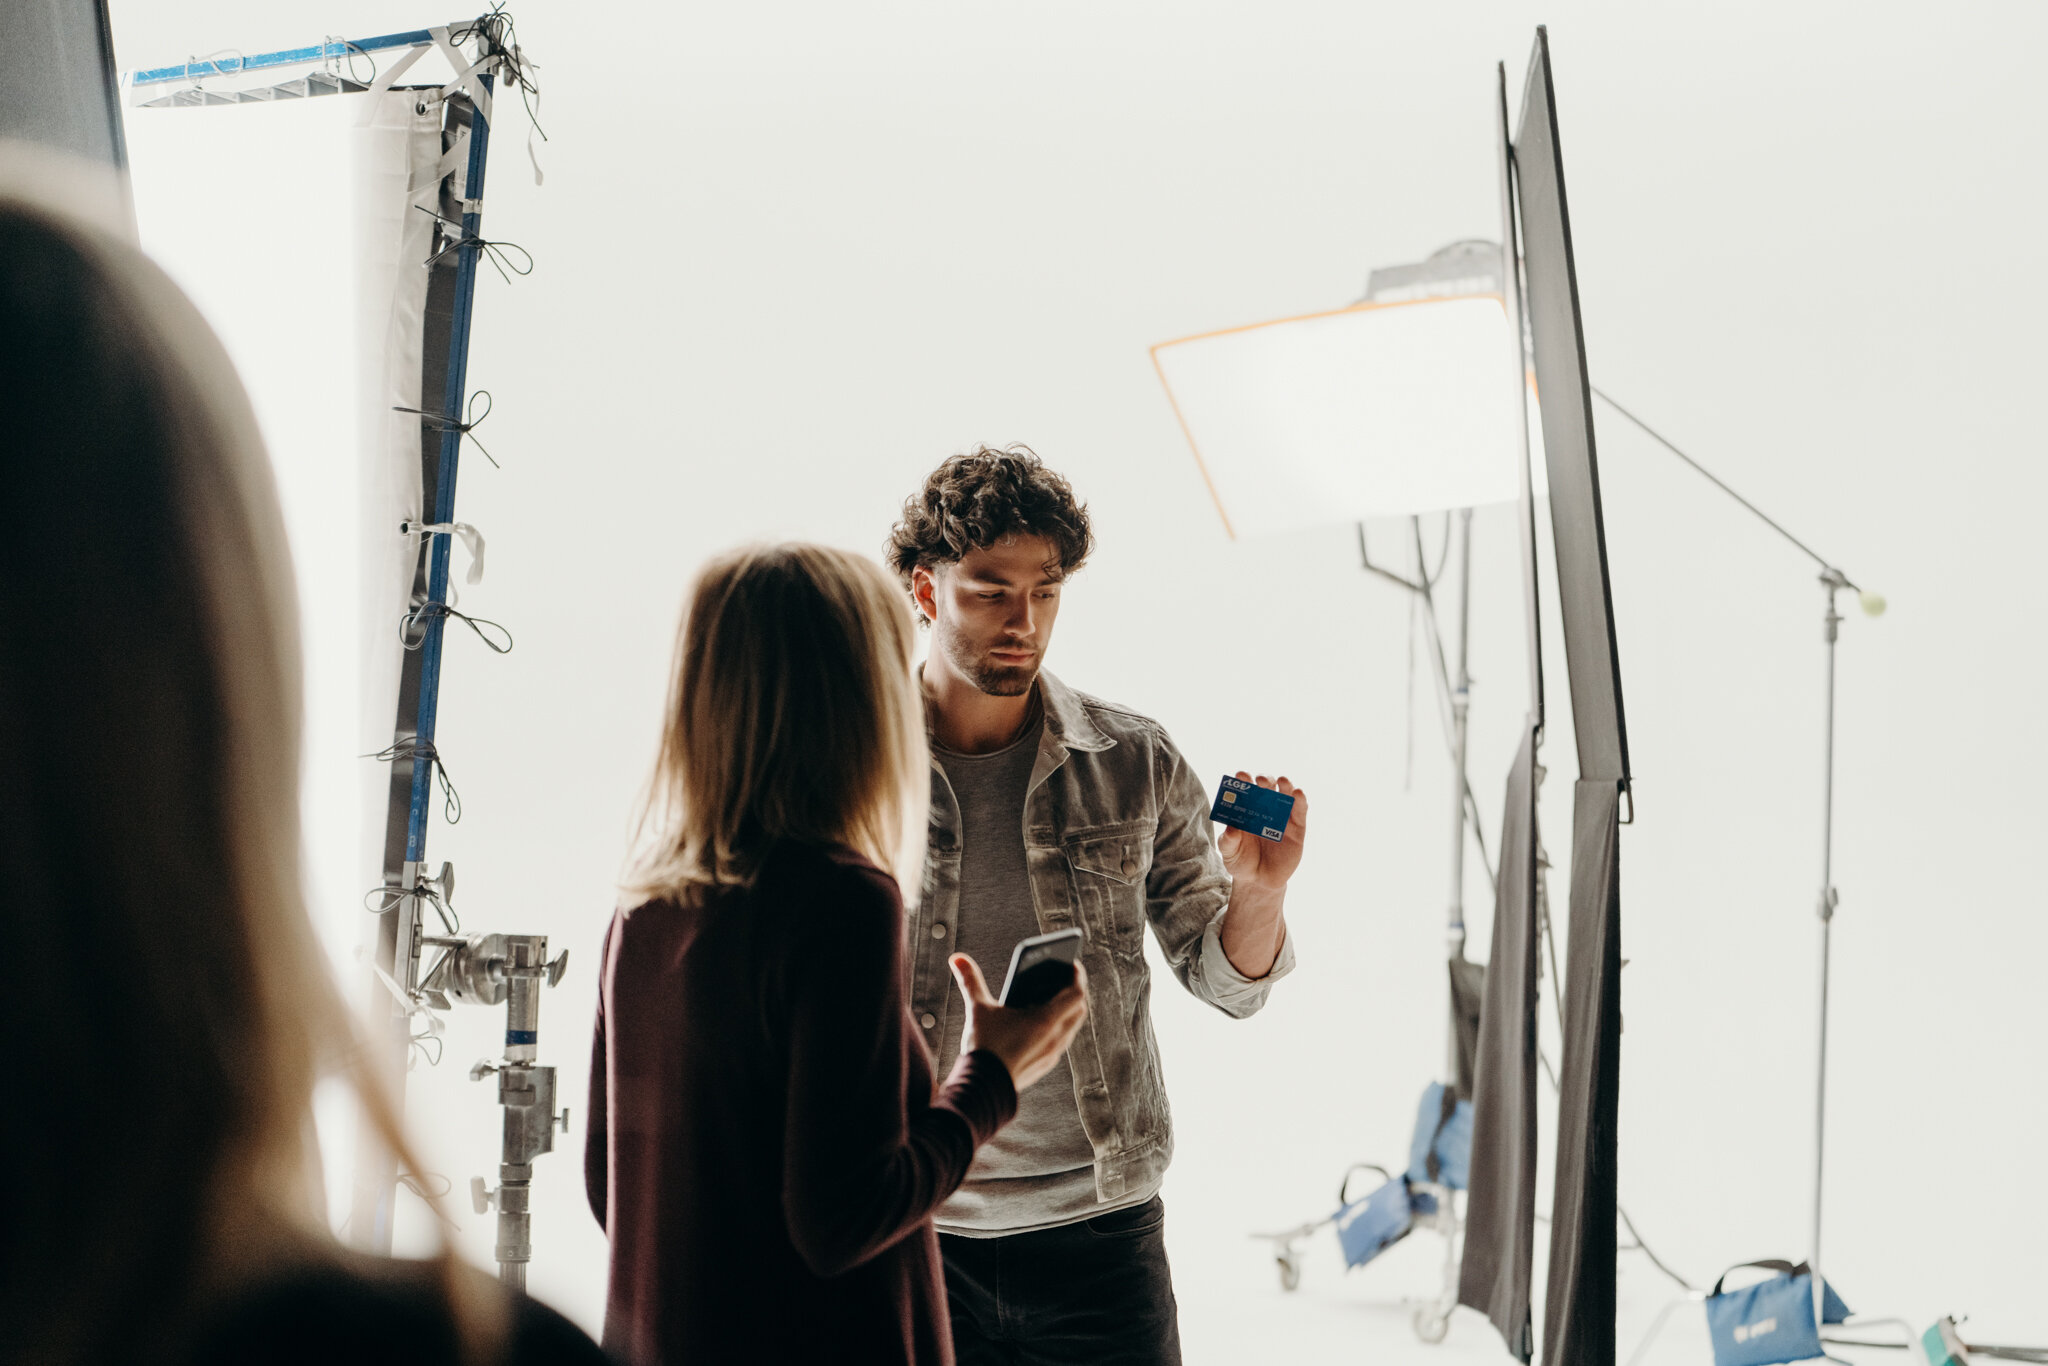 Hales Photo-LGE-Dansby Swanson-bts-atlanta commercial advertising photography celebrity portrait phtoshoot editorial-0003.jpg